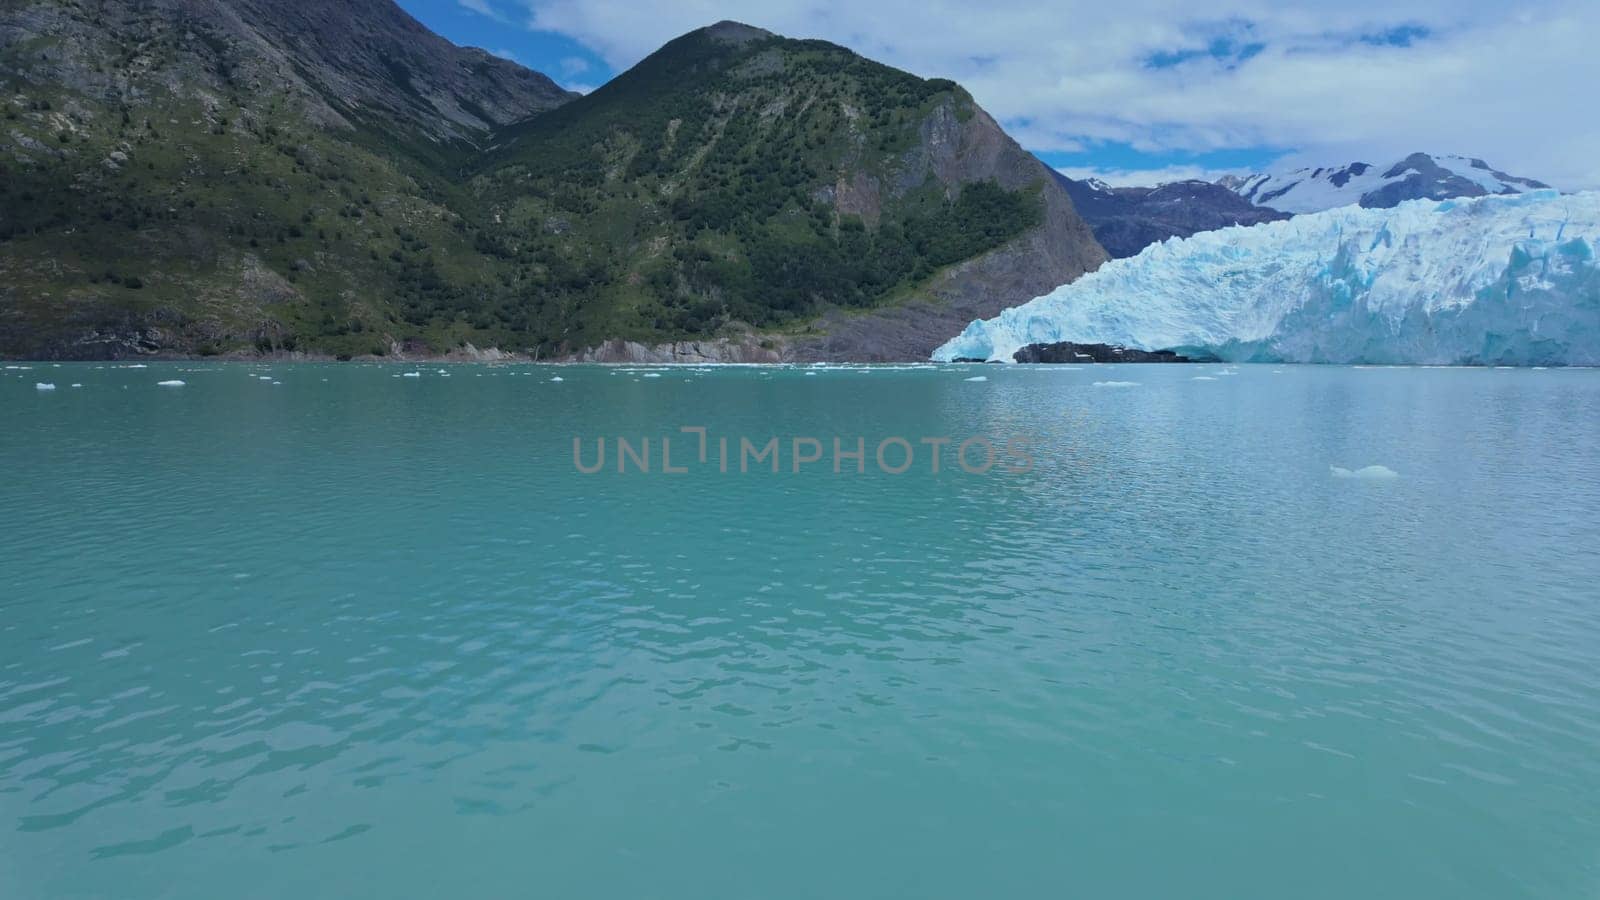 Tranquil video of a trip across a turquoise glacial lake framed by towering mountains.